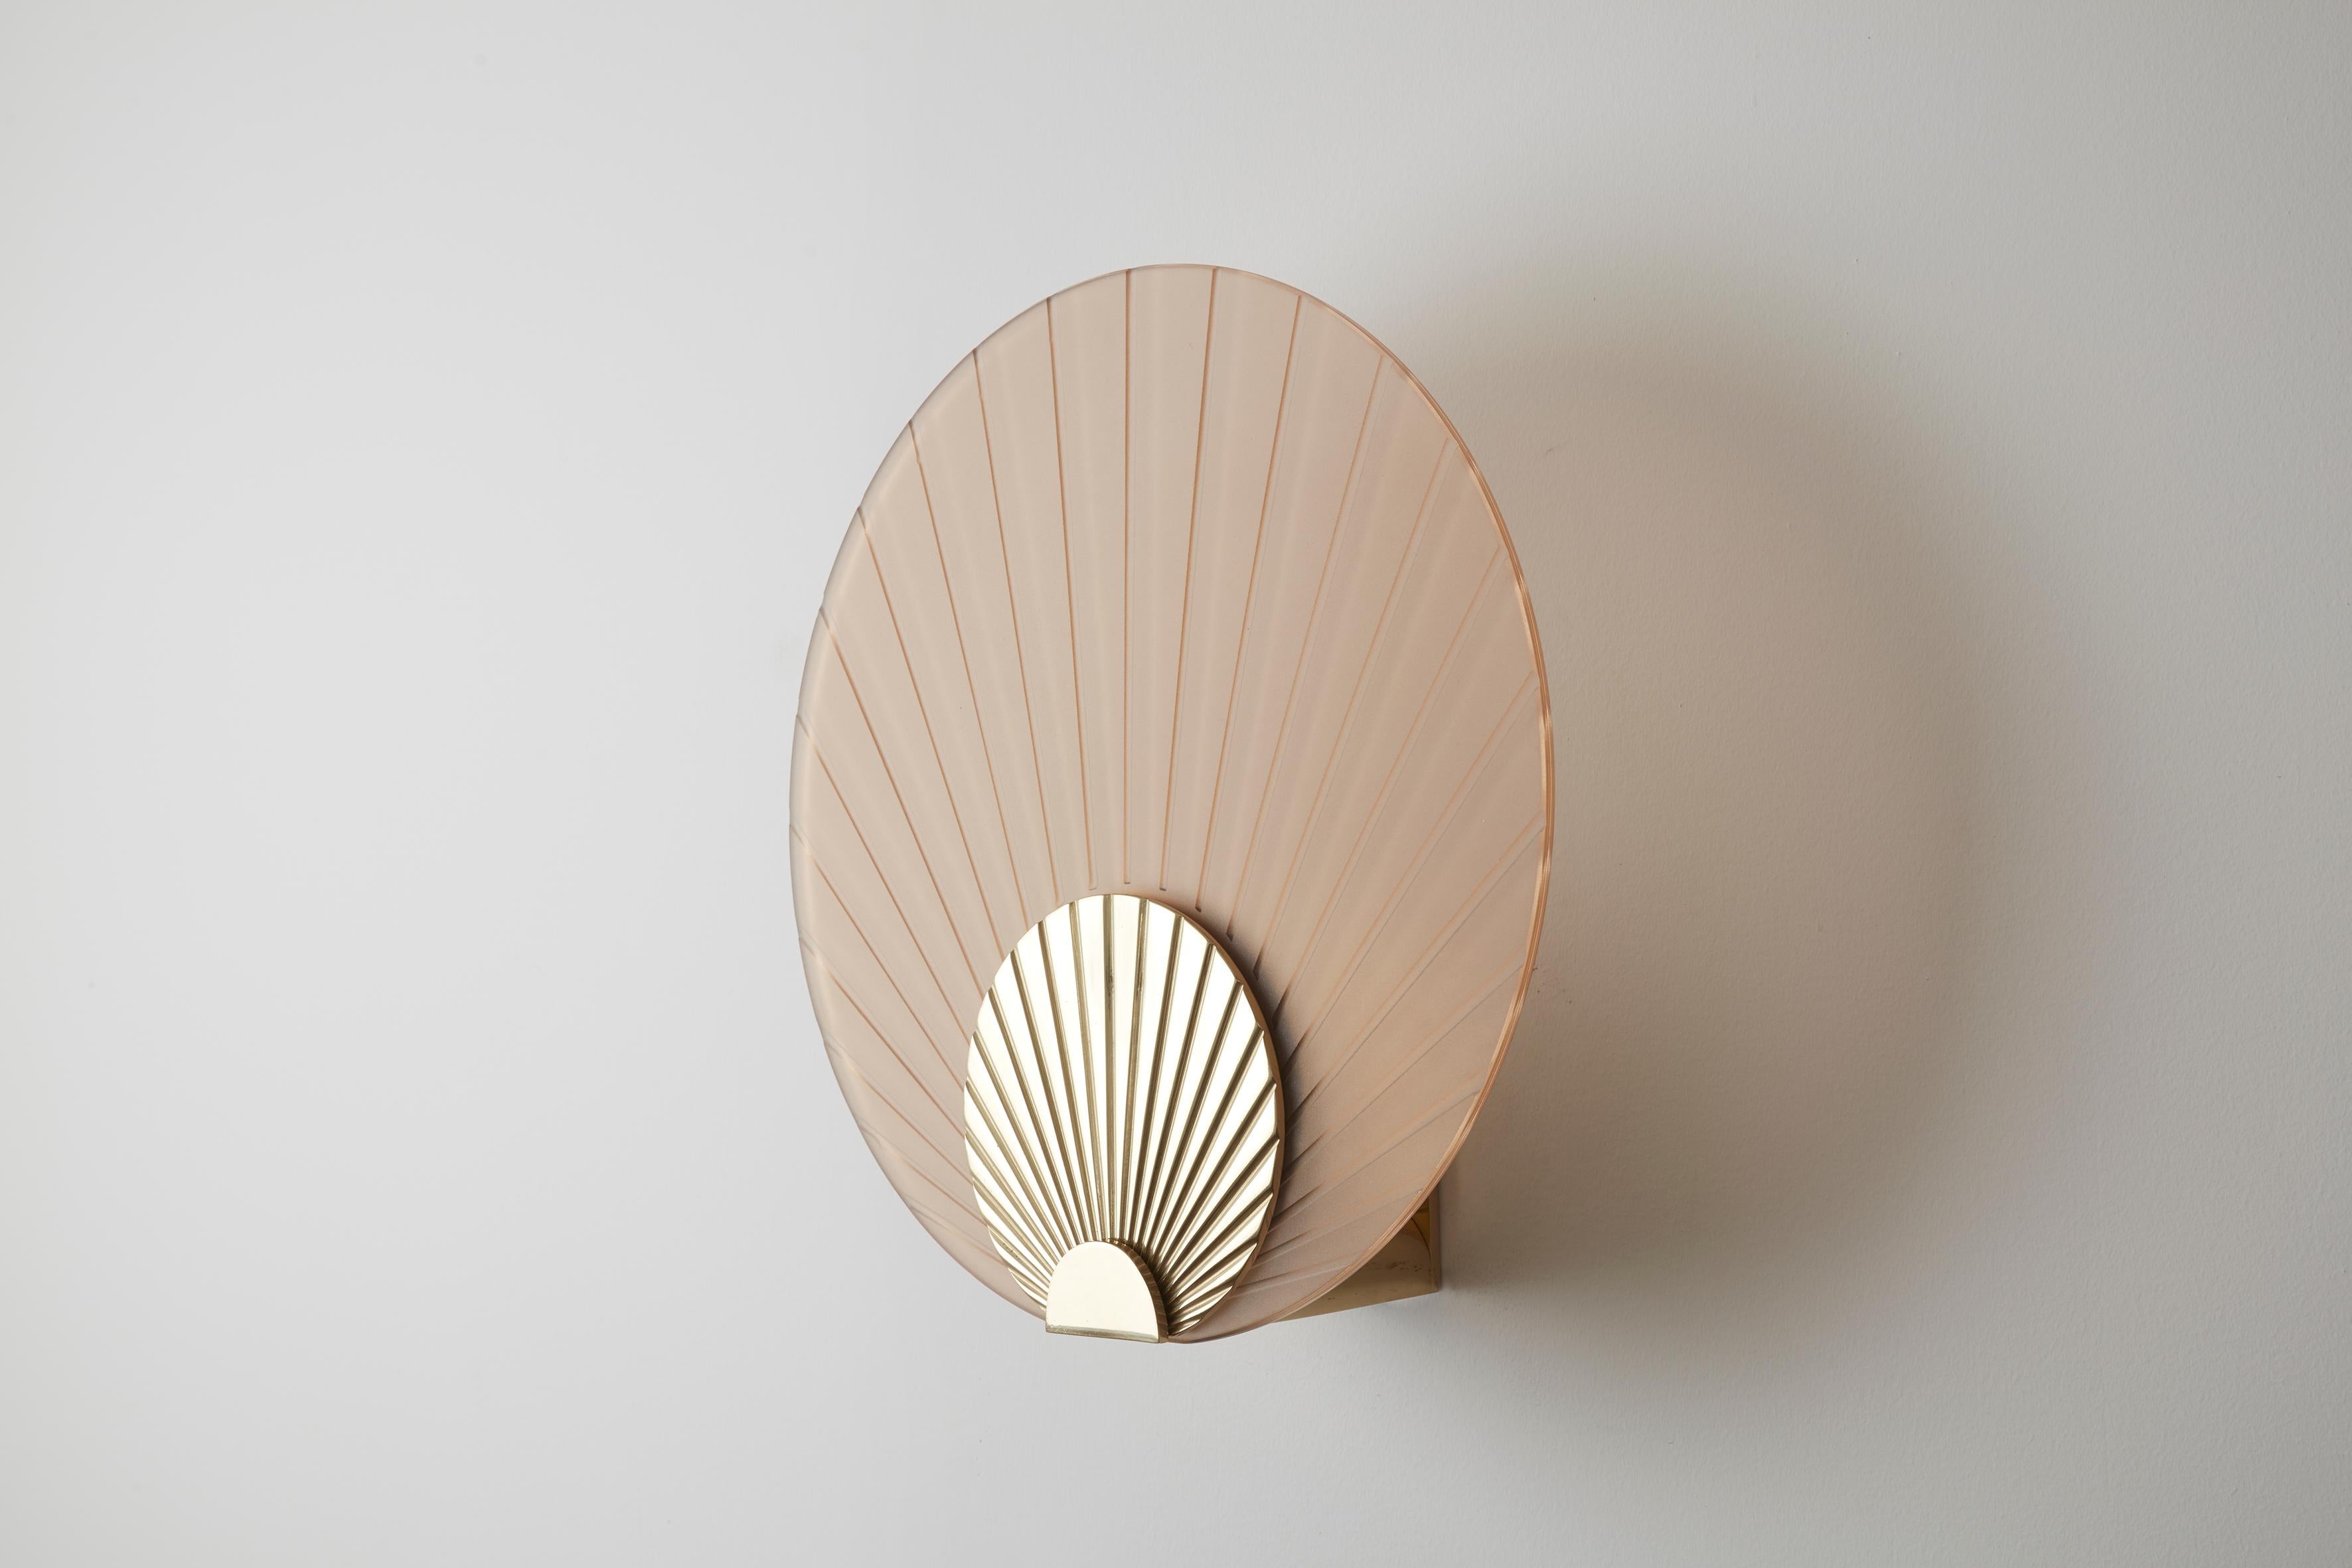 Maiko wall mounted brass and nude, Carla Baz
Dimensions: ø 35 x D 14 cm
Weight: 3.5 kg
Material: Brass

Maiko lighting pieces are inspired by the beautiful Japanese folding fans held by geishas and maikos during their notorious dances. These